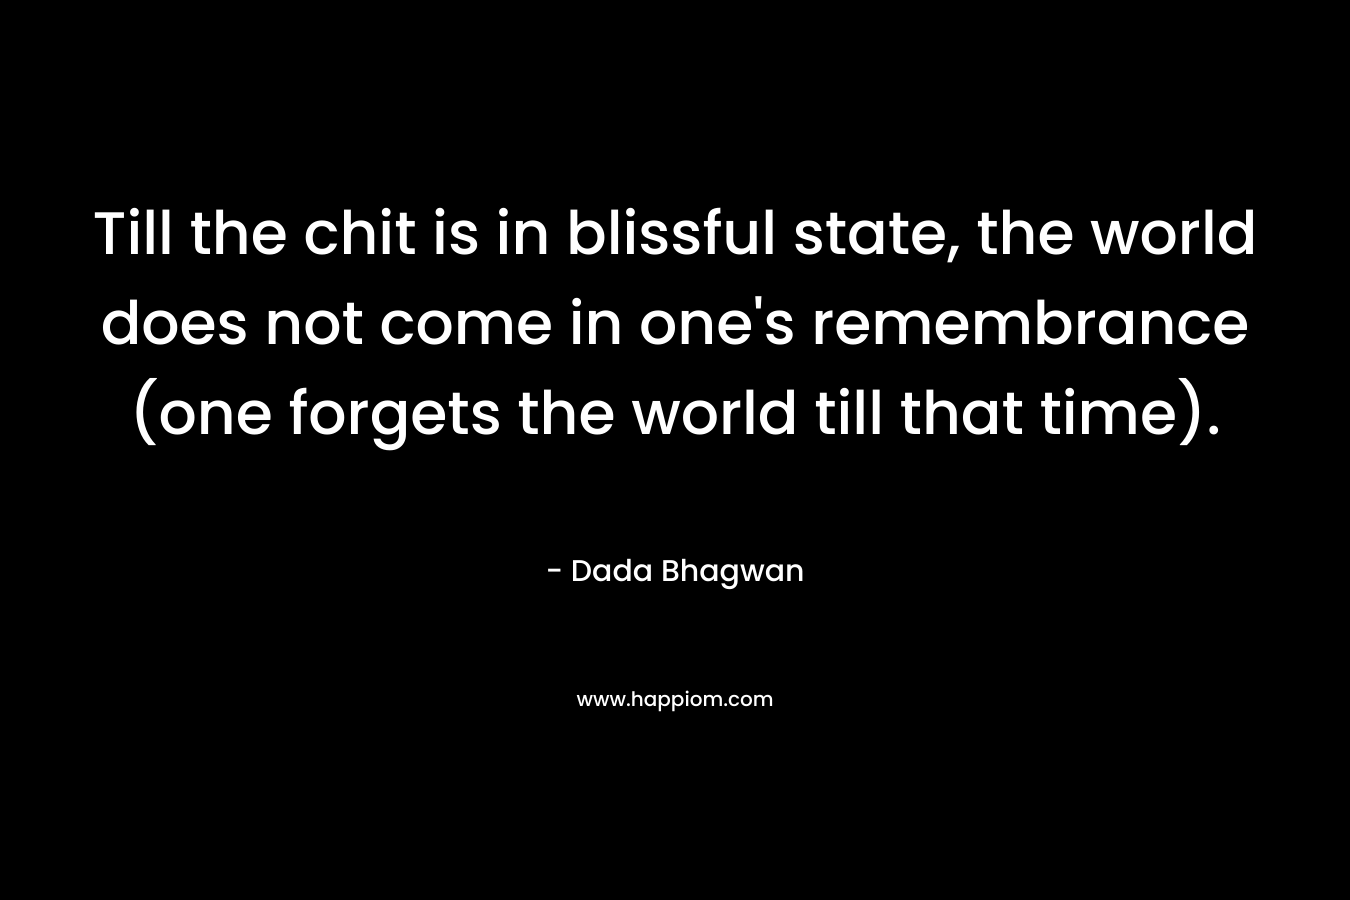 Till the chit is in blissful state, the world does not come in one's remembrance (one forgets the world till that time).